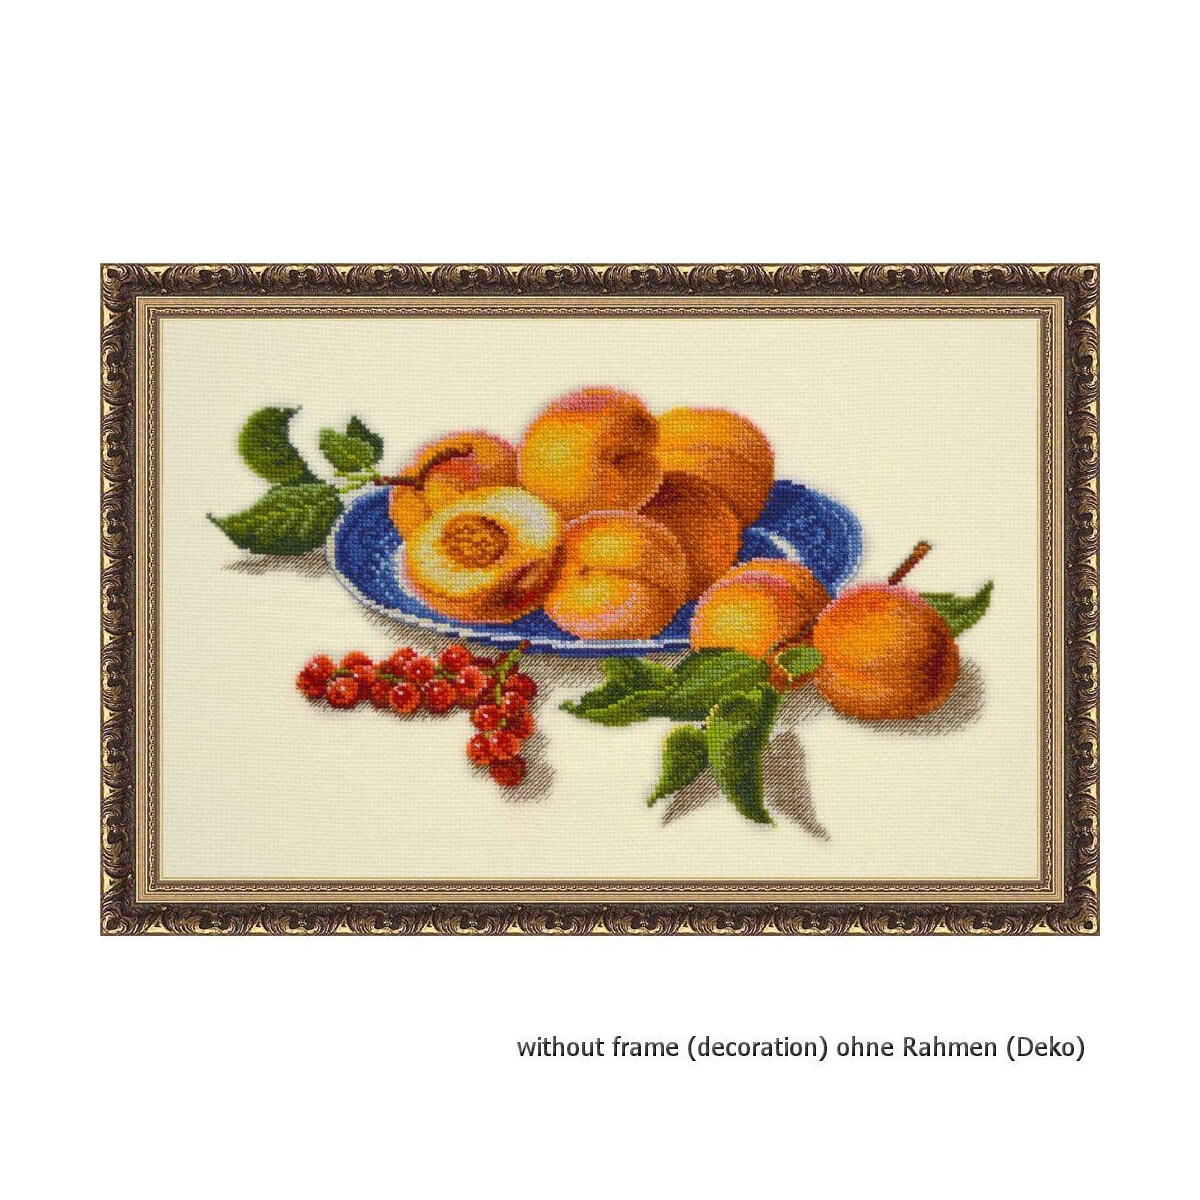 Oven counted cross stitch kit "Taste of...